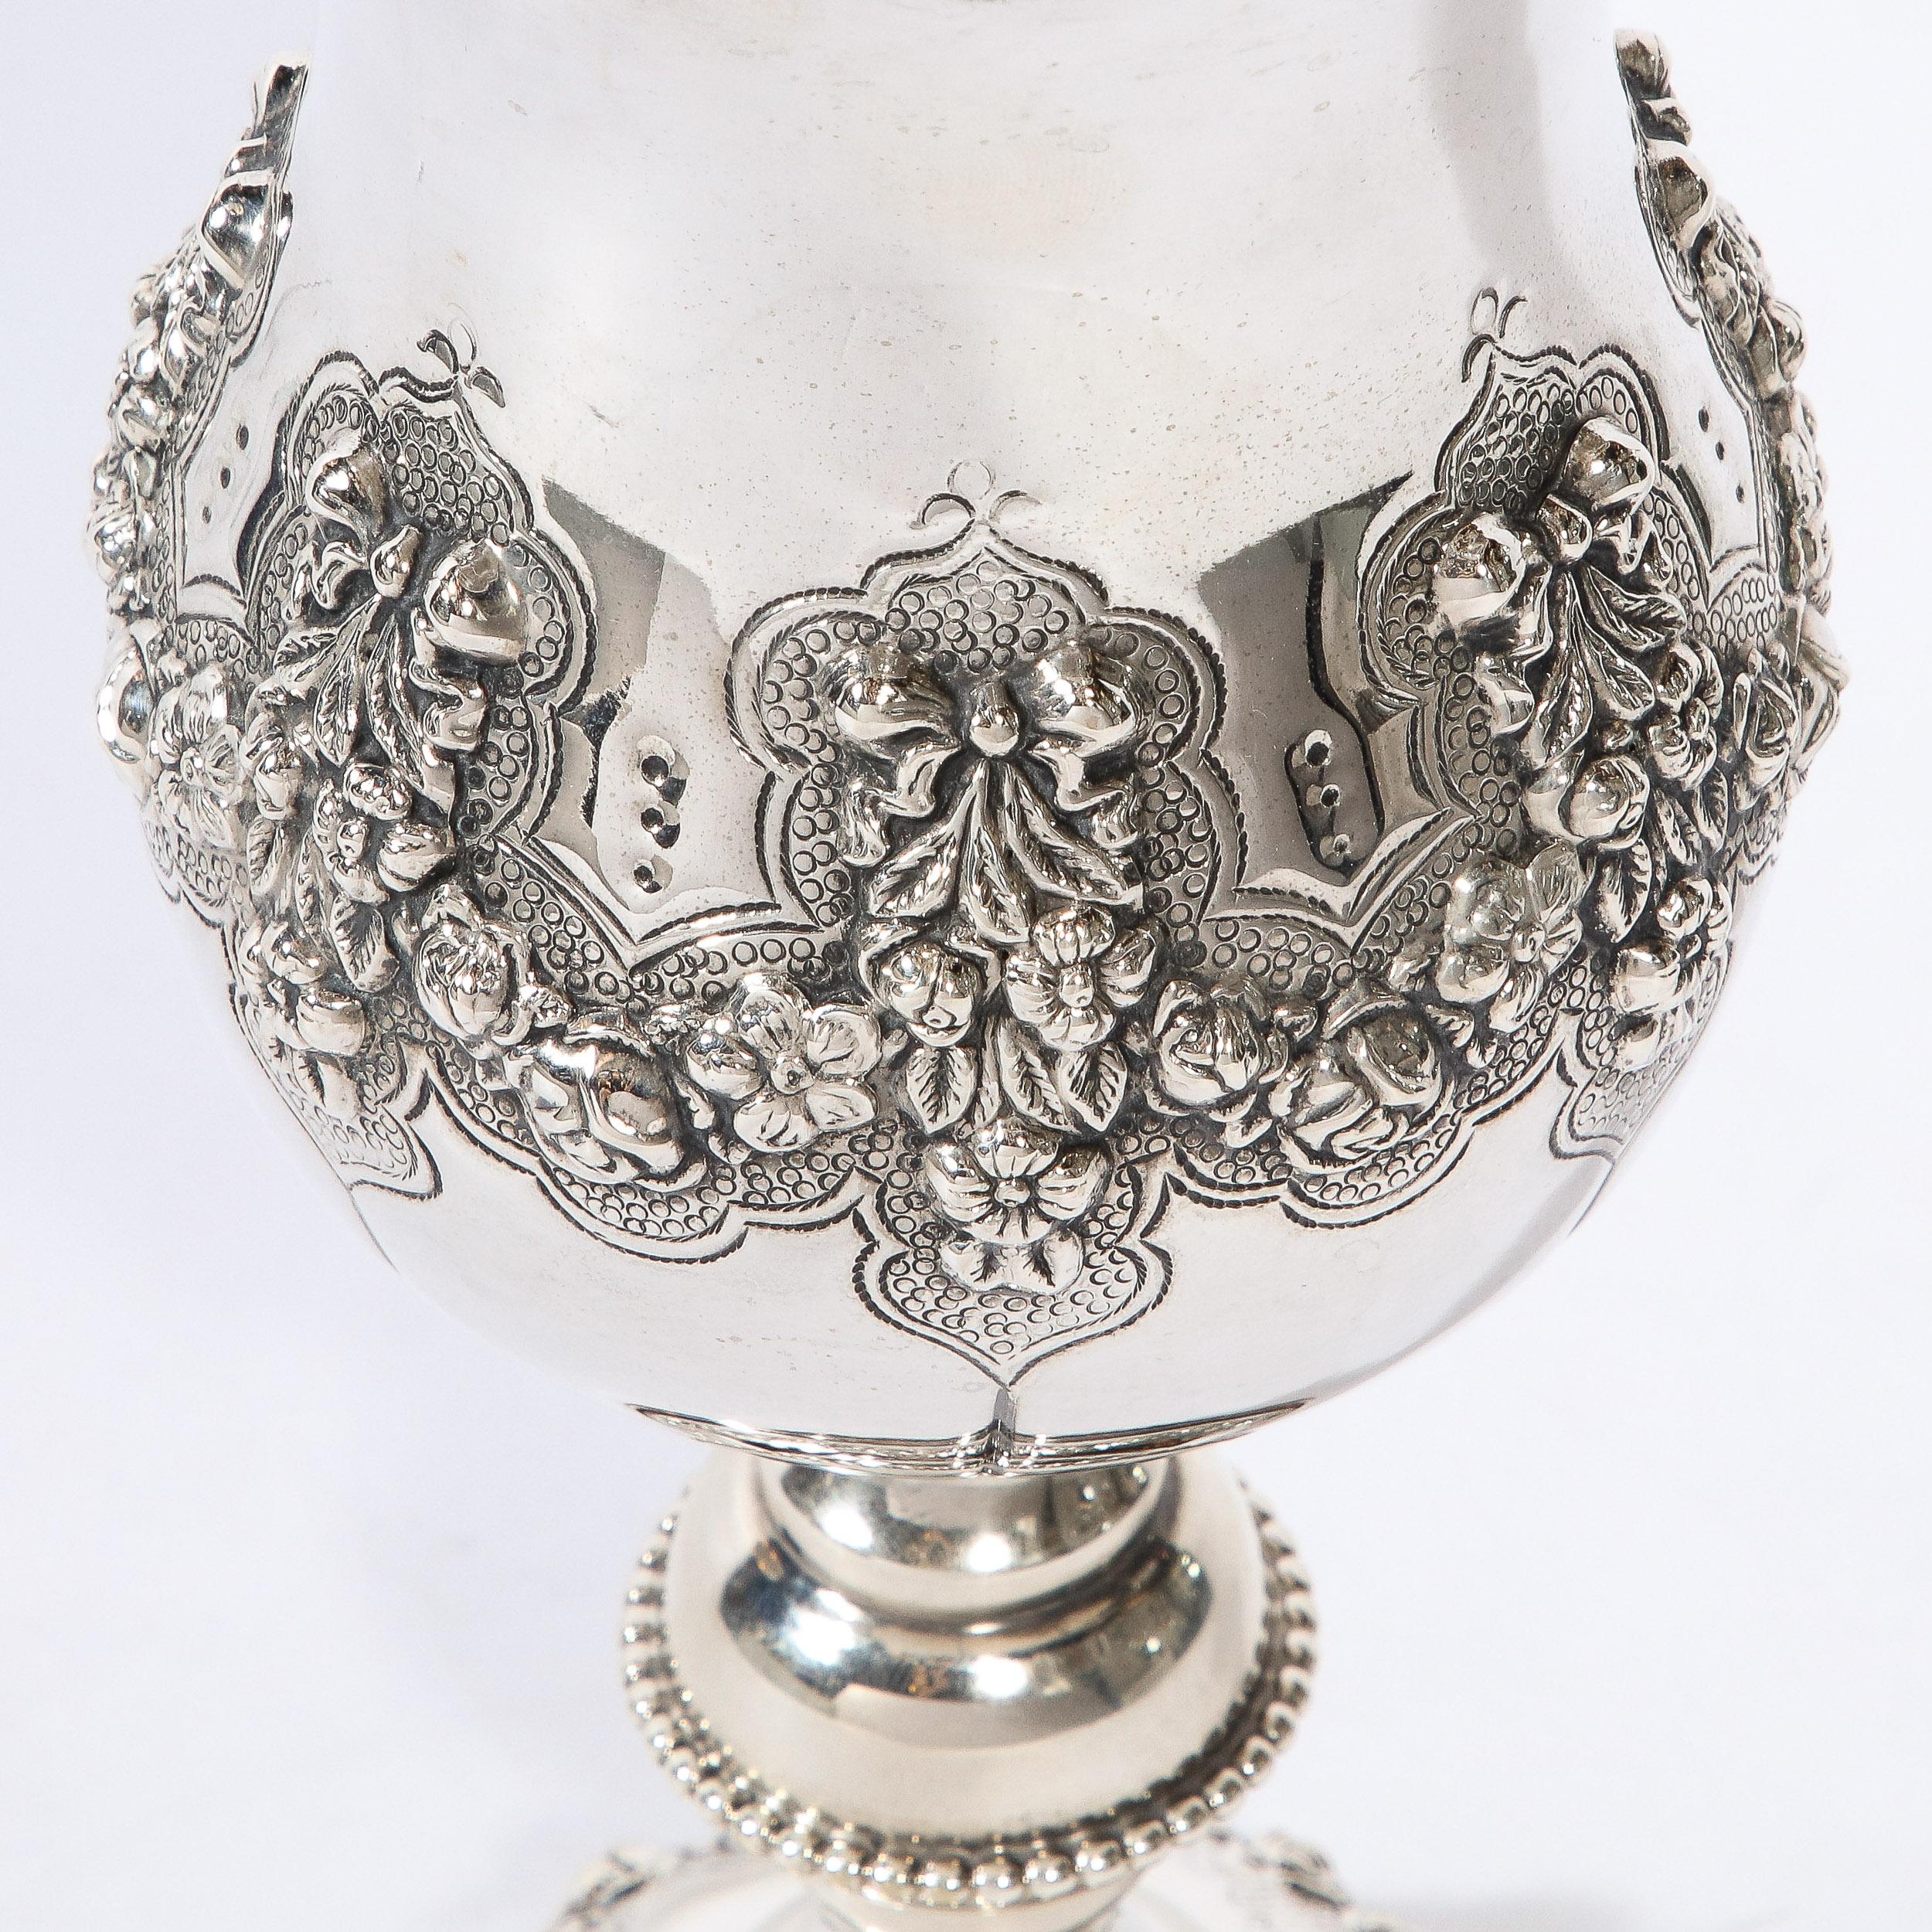 Silver Monumental Sterling  Kiddish Goblet with Repousse Designs  by Hadad Brothers For Sale